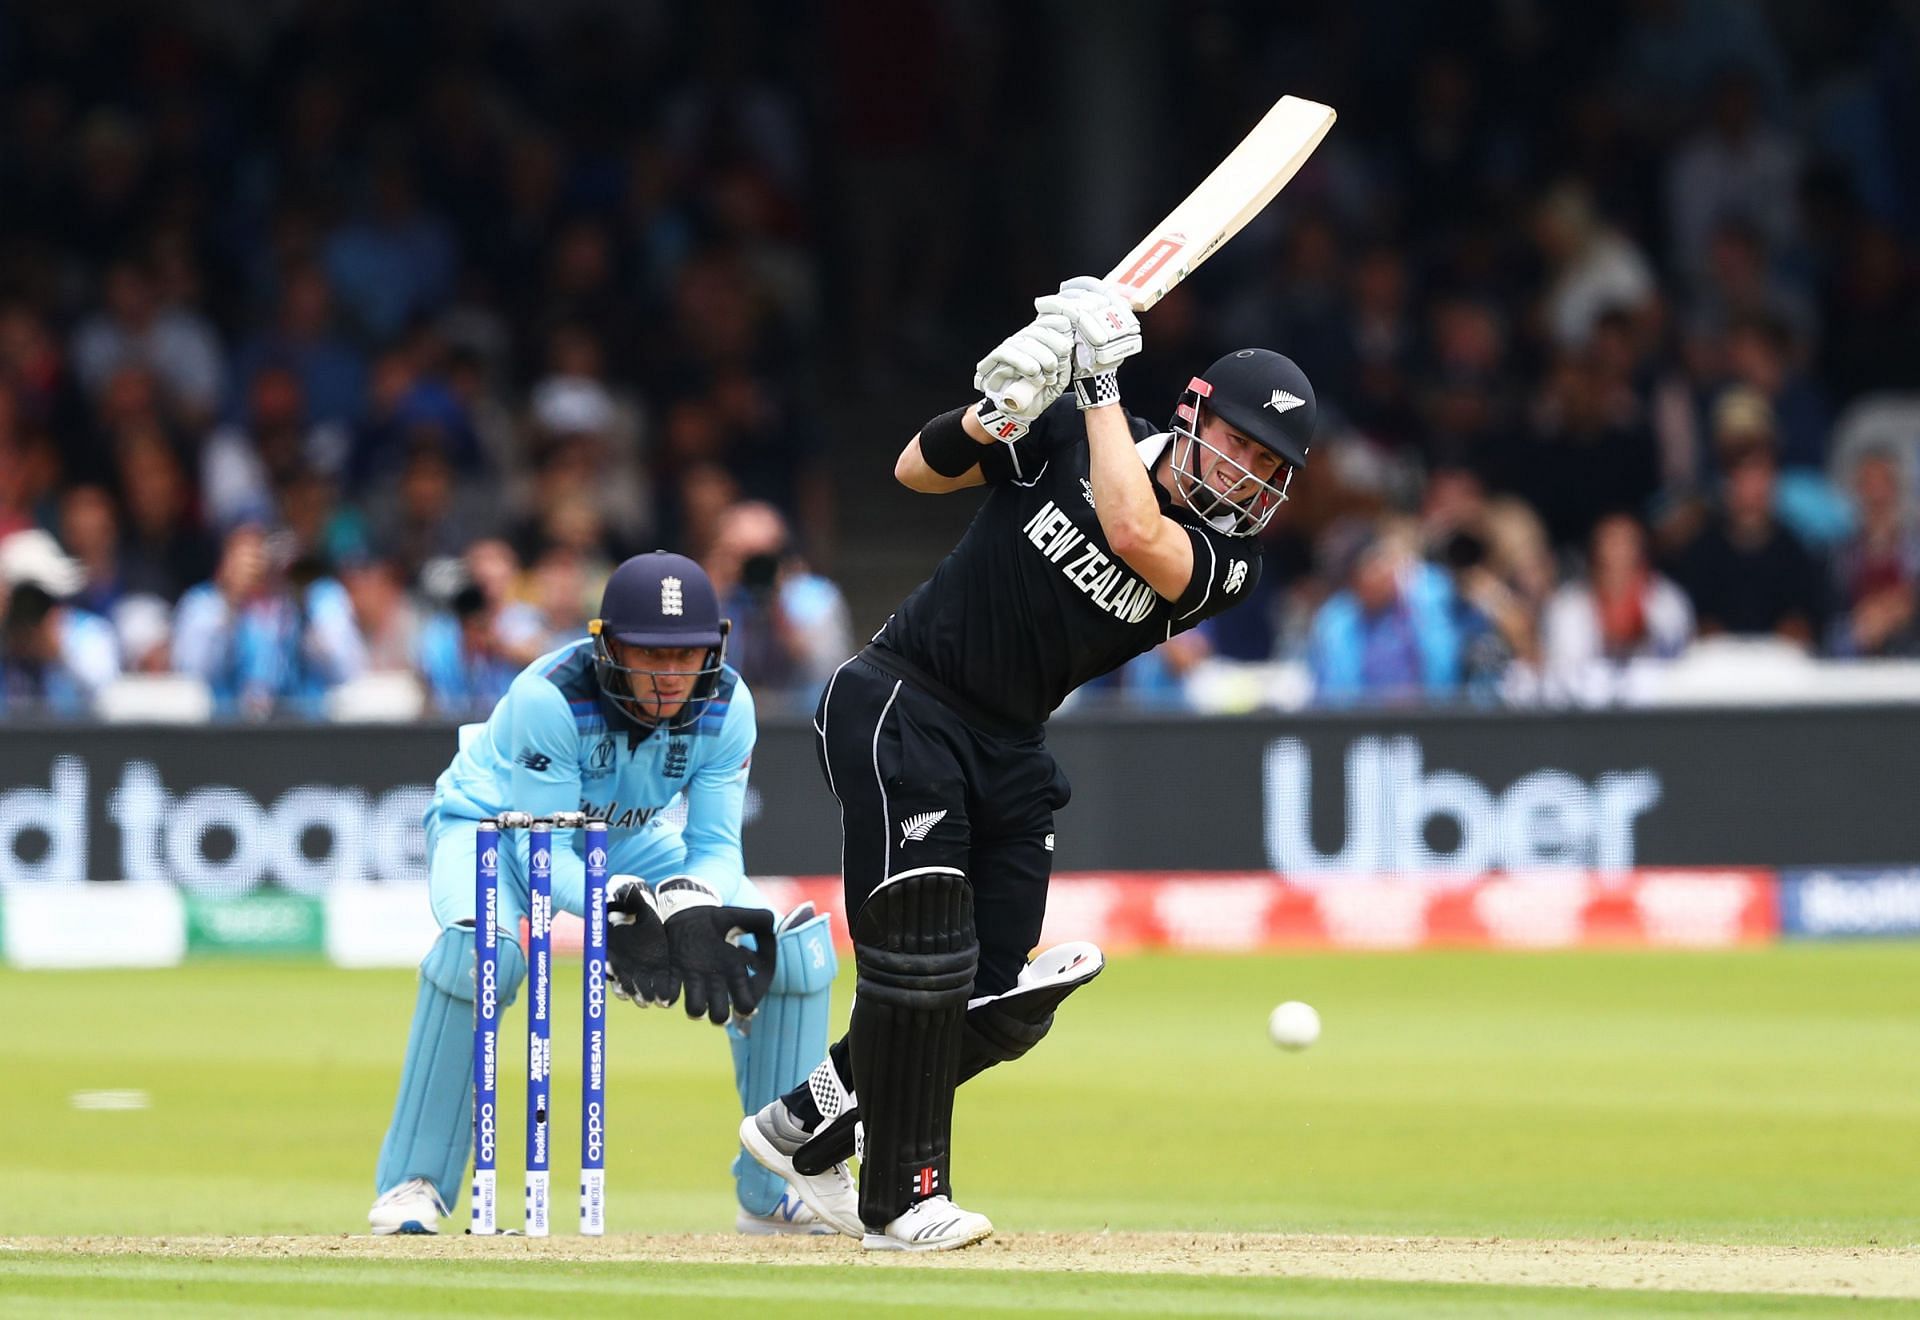 Henry Nicholls hit a hard-fought fifty in the 2019 World Cup final. (Pic: Getty Images)019